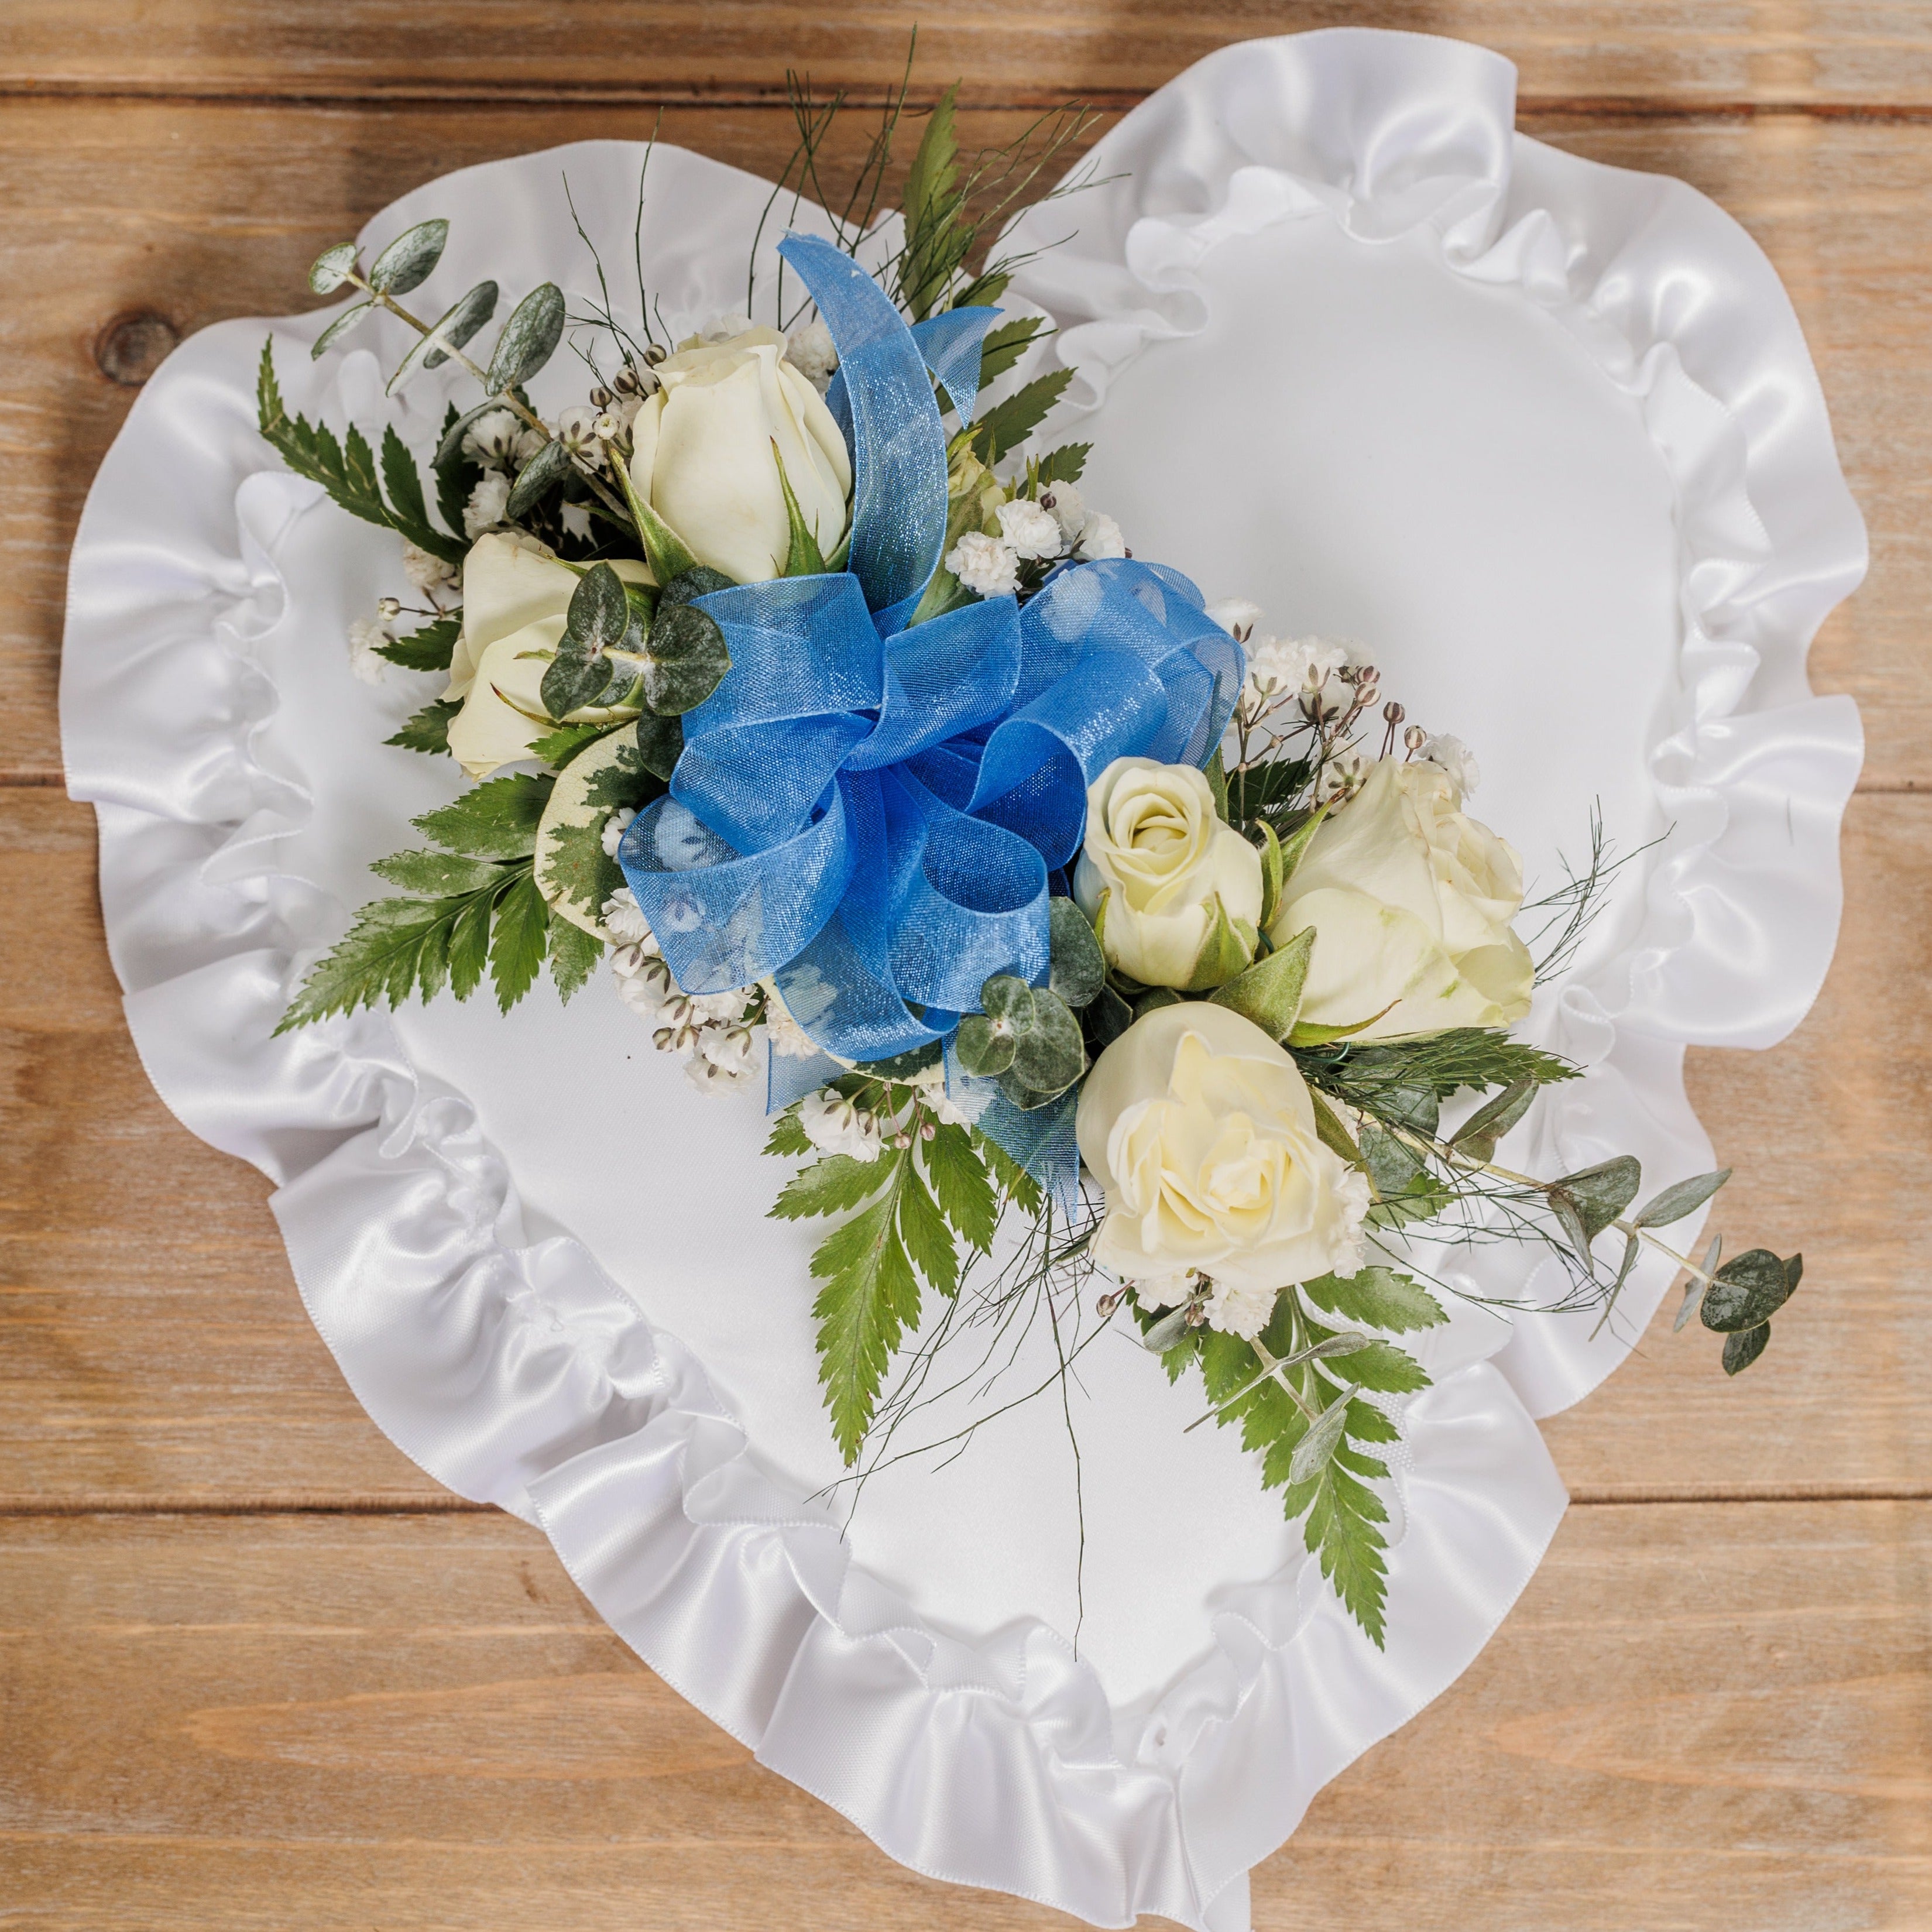 A white satin heart pillow with white roses and blue ribbon.